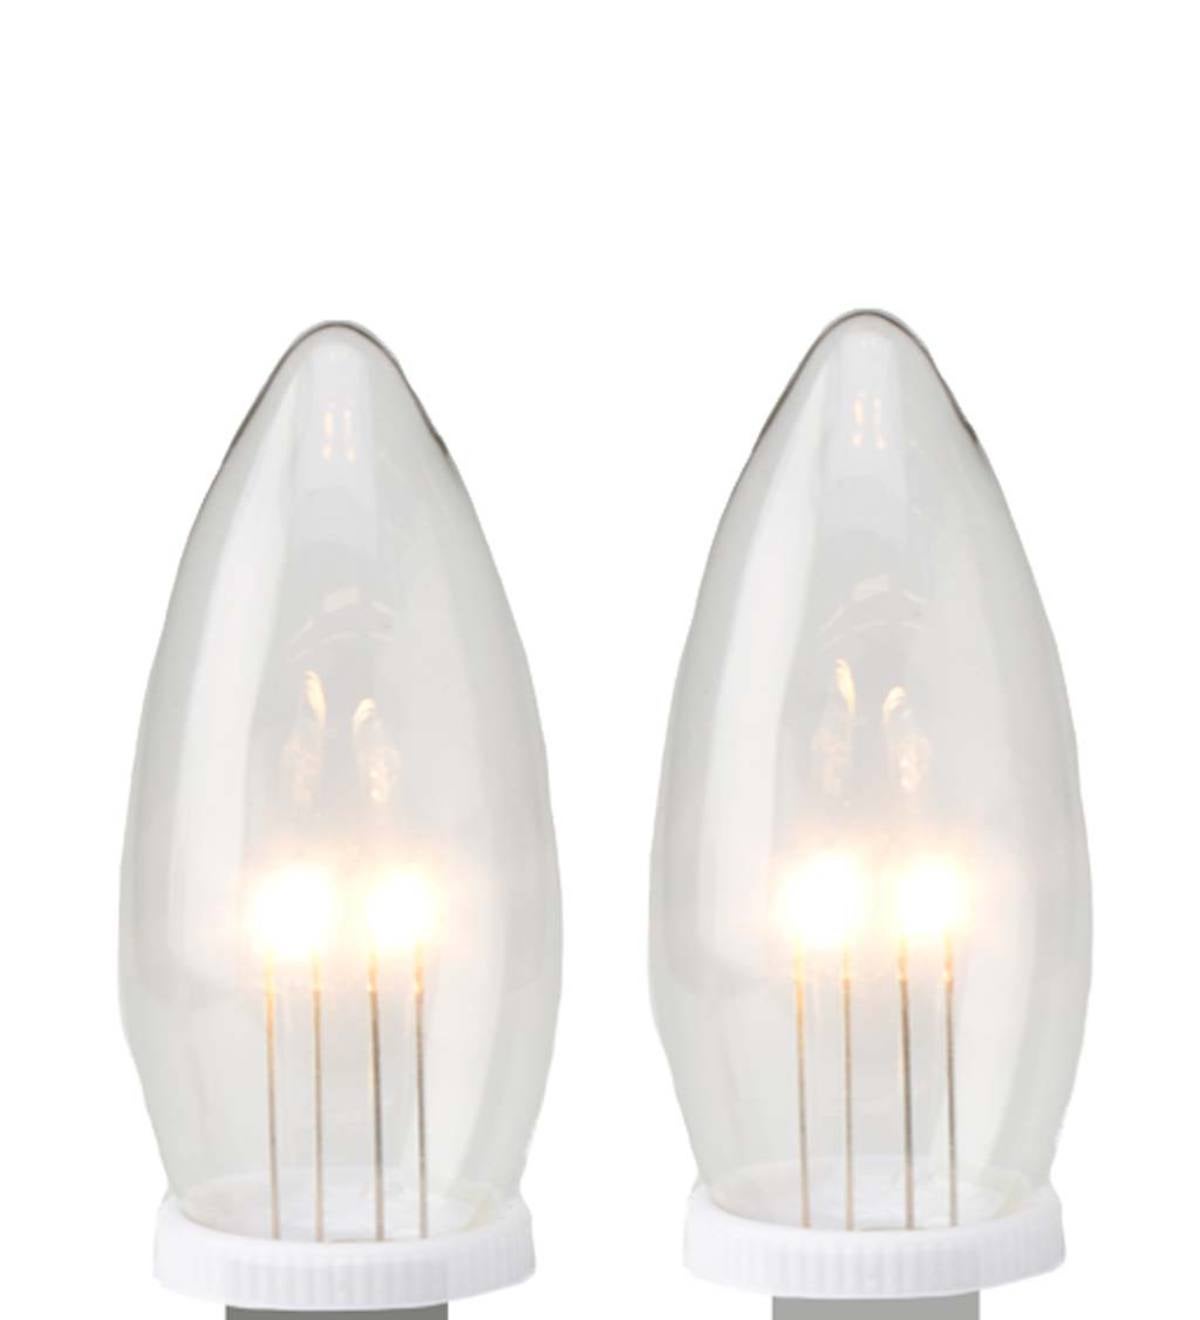 Flickering Outward-Facing LED Replacement Bulbs, Set of 2